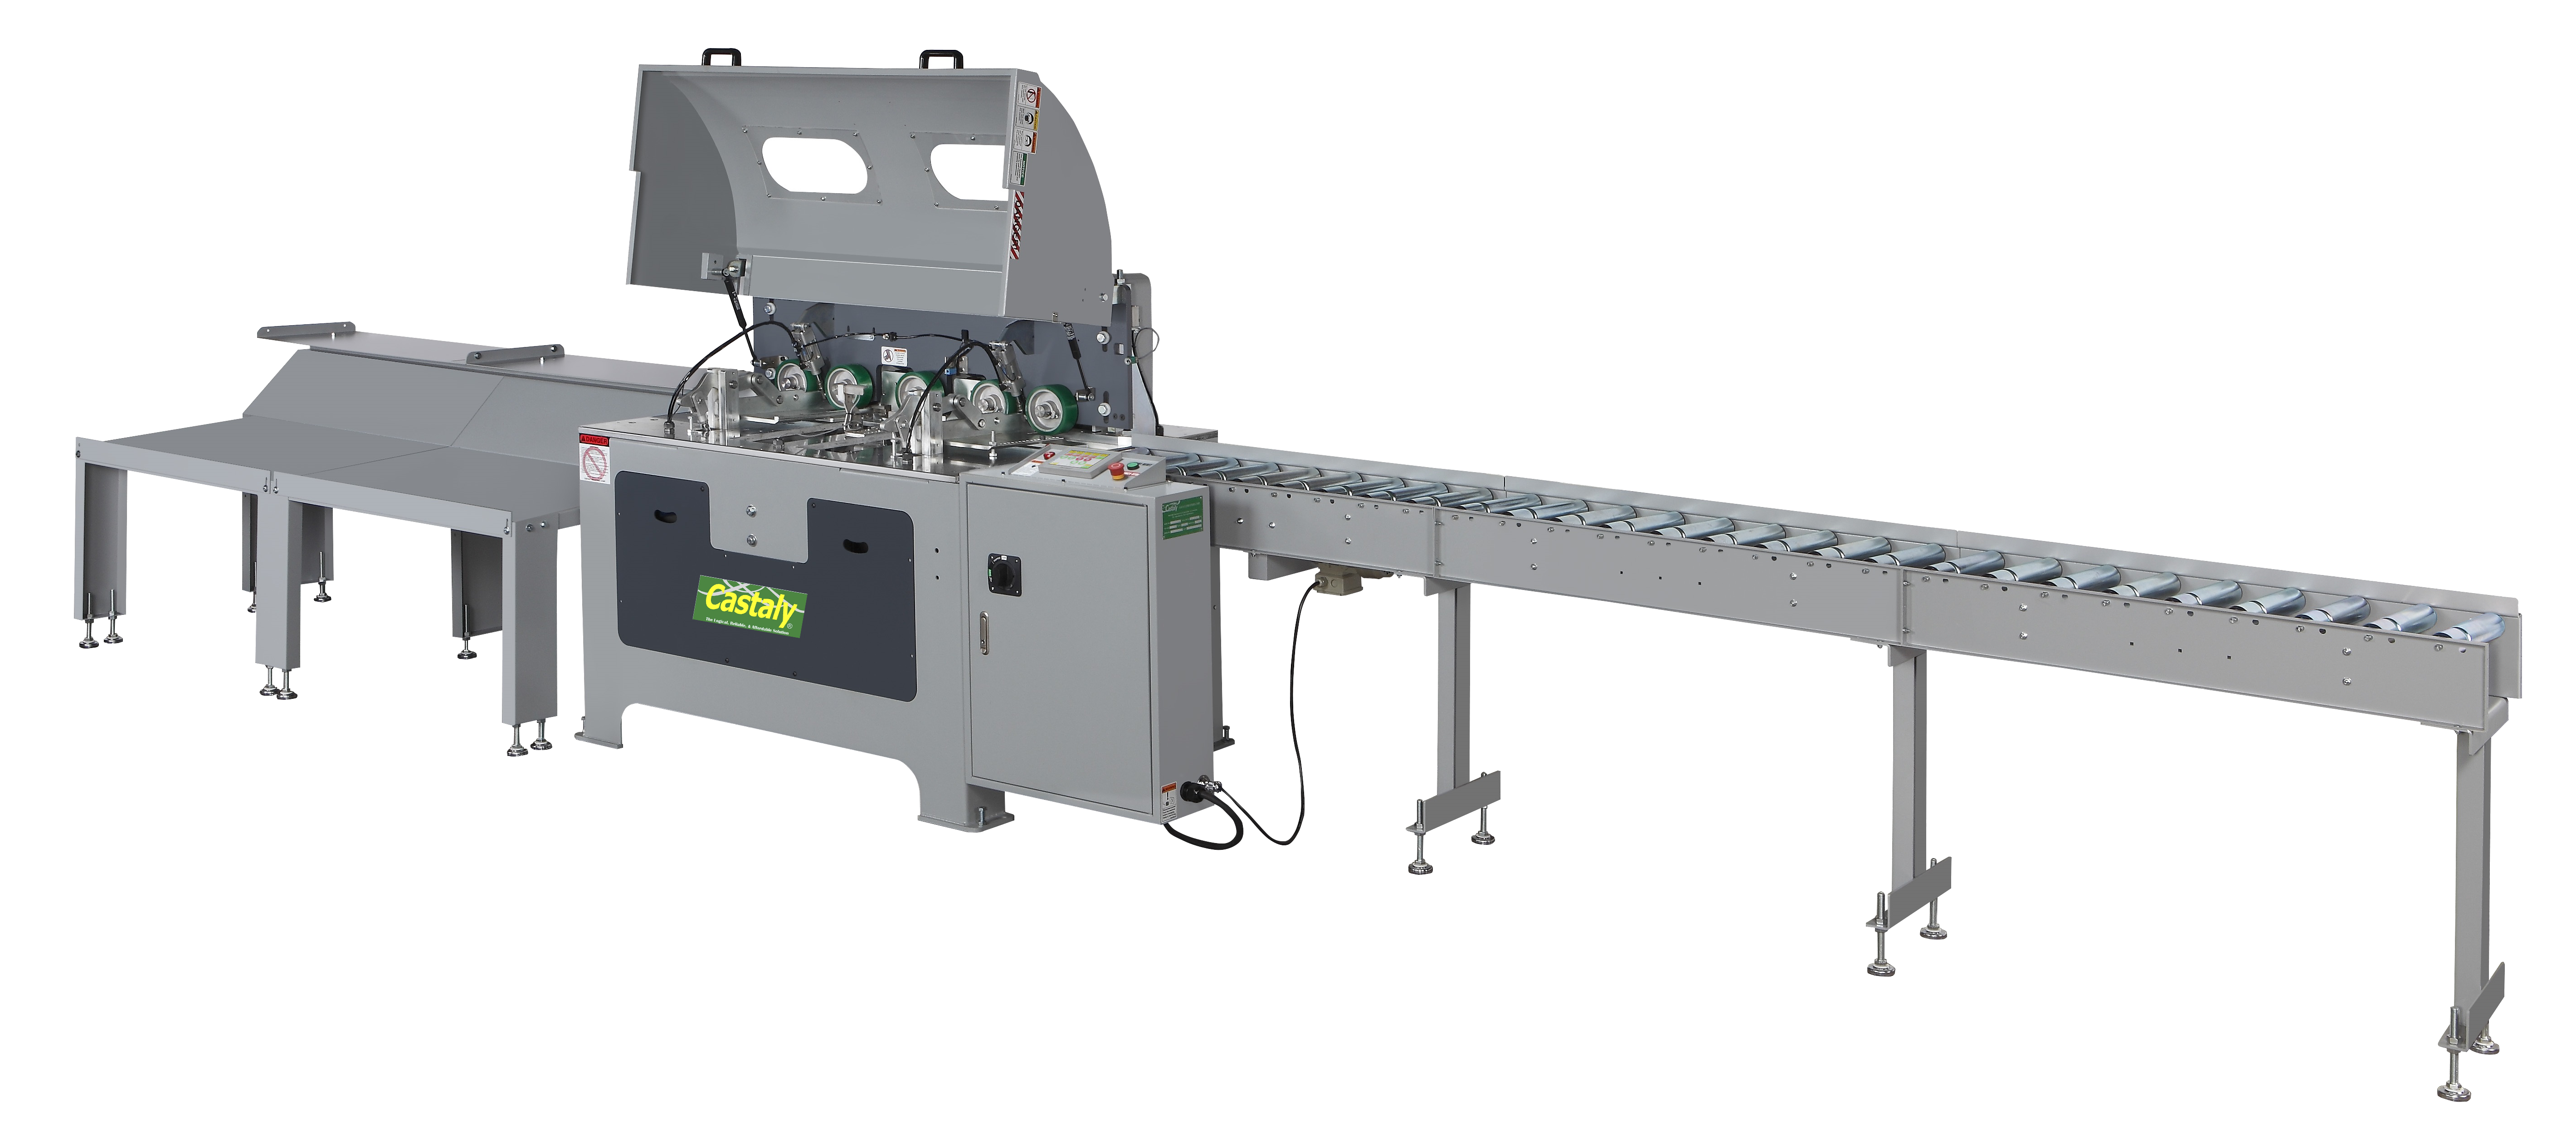 Feed Through Auto End Matcher / Tenonor / Finger Jointer (include 12 ft Power Rollers Infeed Conveyor & 7 ft Outfeed Table)